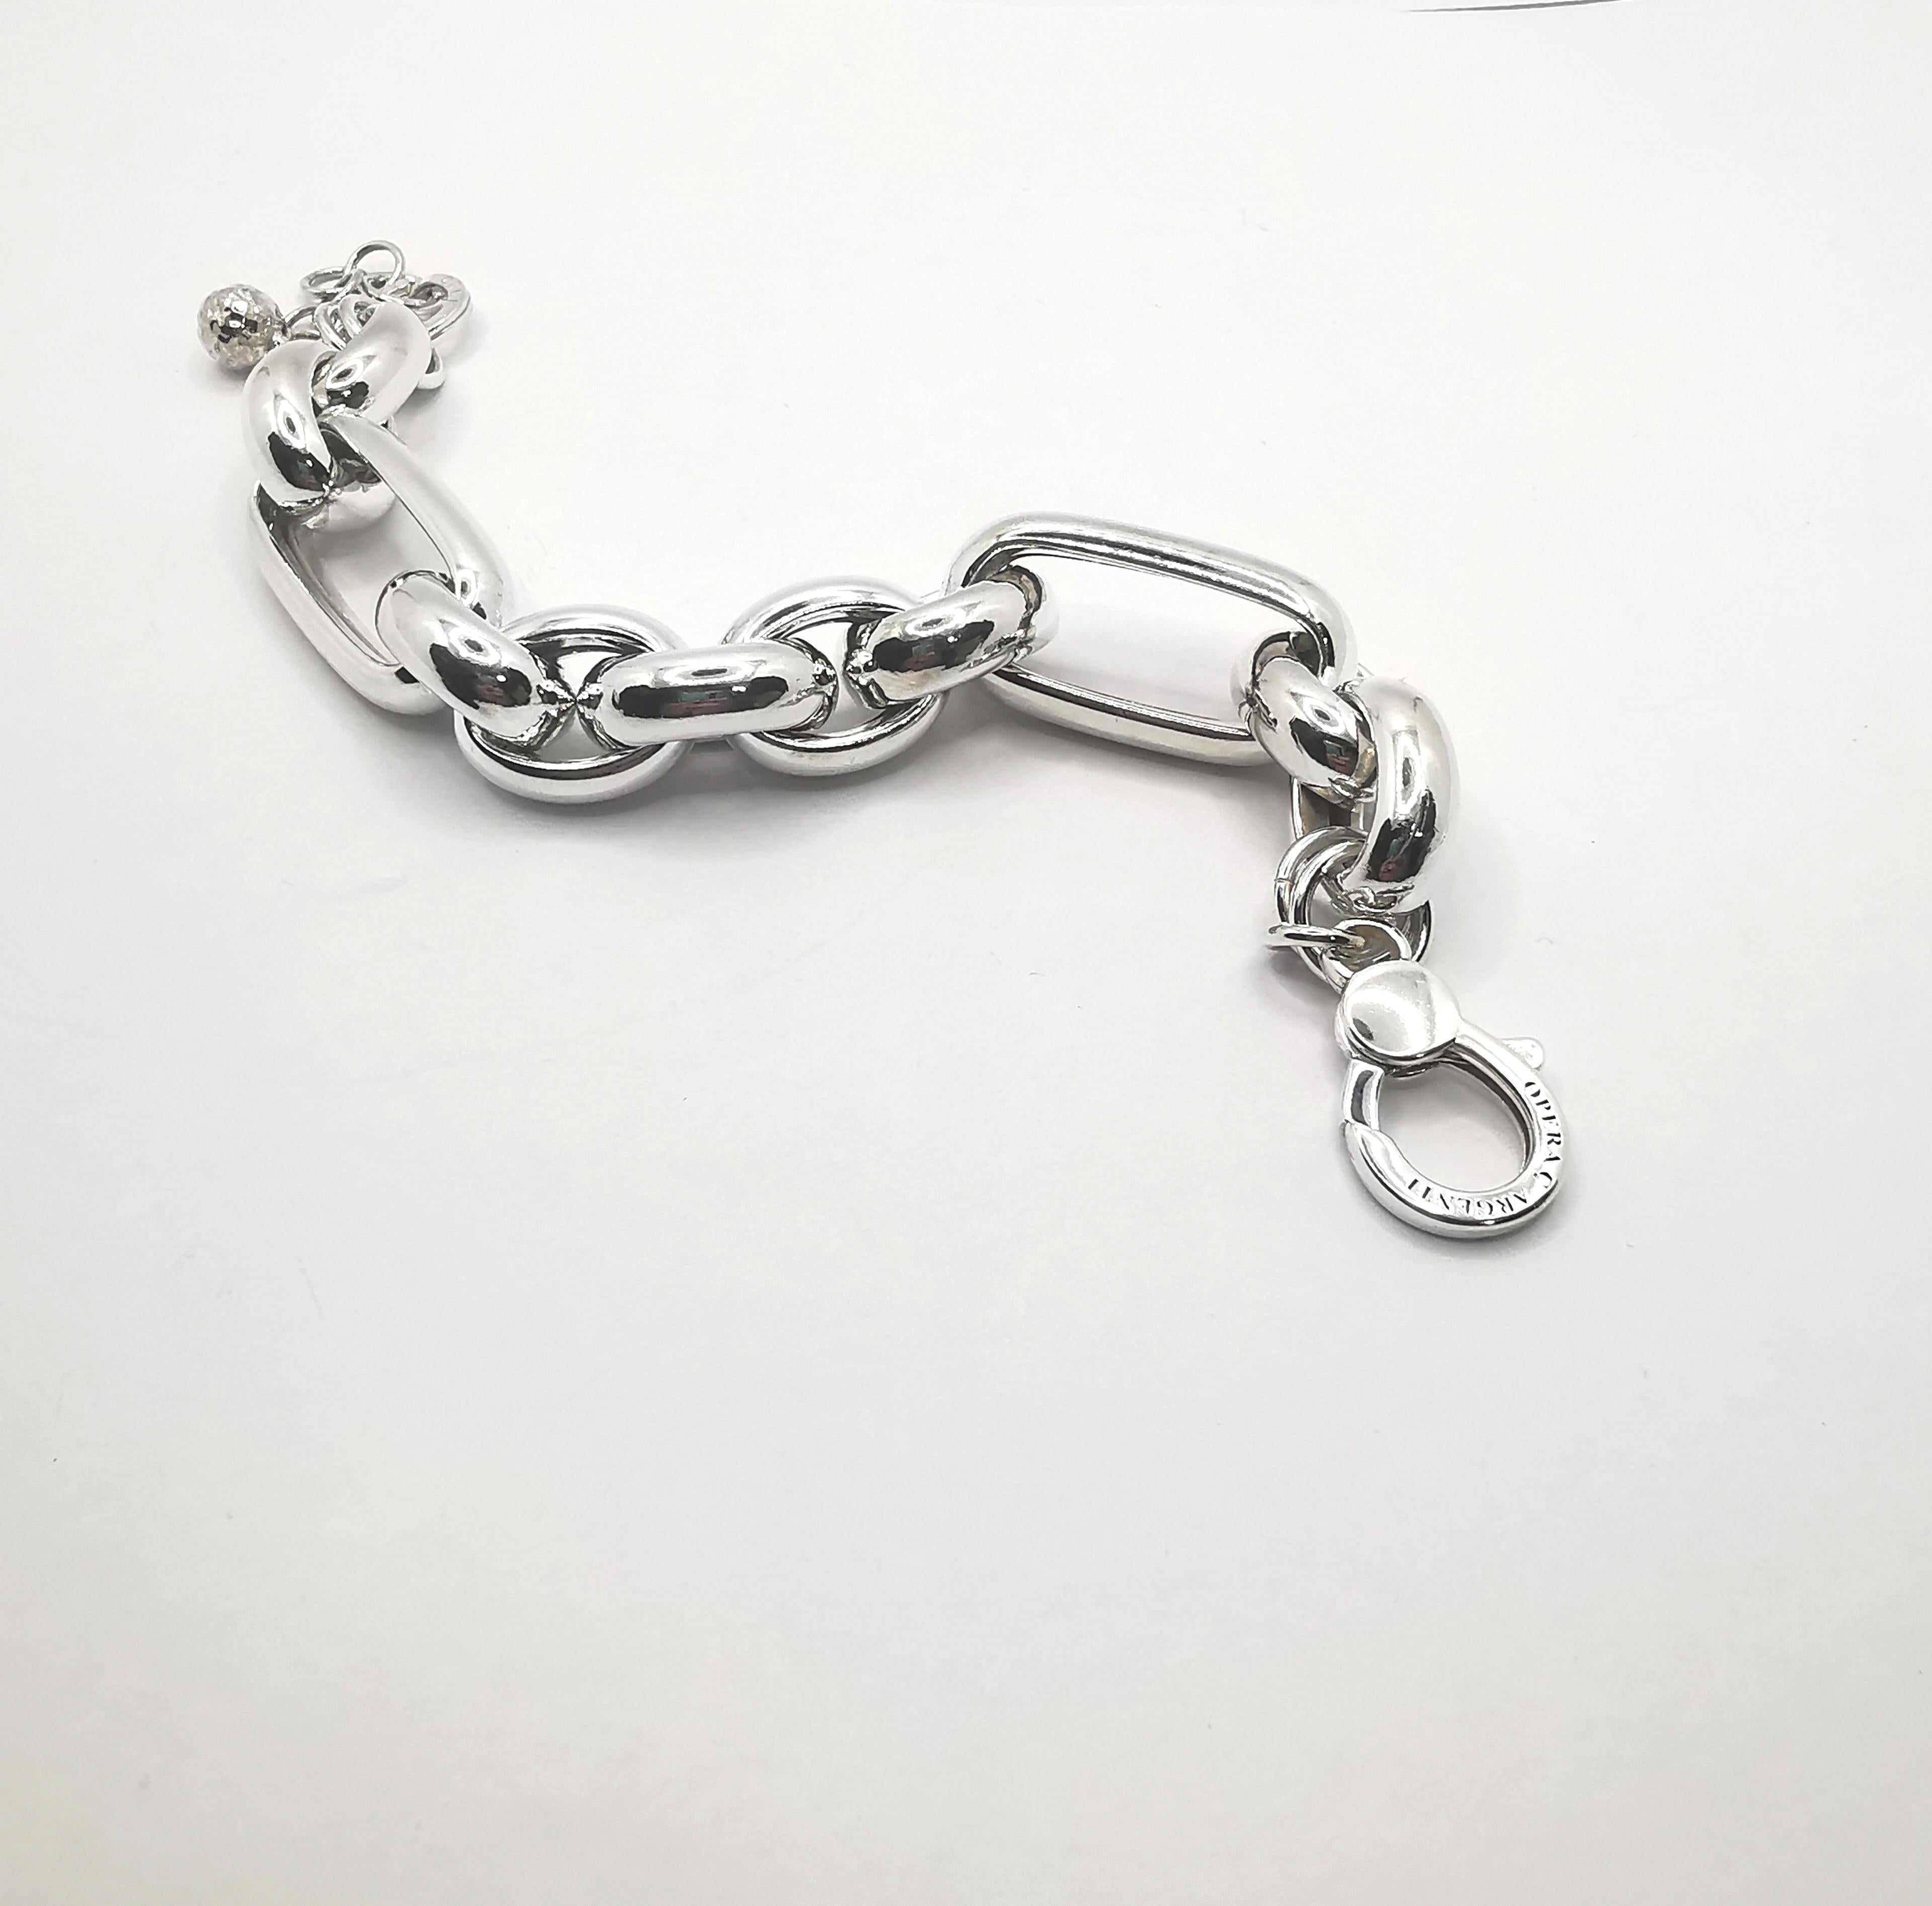 This silver bracelet is a jewelry classic.
The oval links are massive; the smaller ones measure 1 x 1.5 cm while the larger ones measure 3 x 1.5 cm.
The bracelet has a minimum length of 18 cm and a maximum length of 21 cm.
In fact, it can be